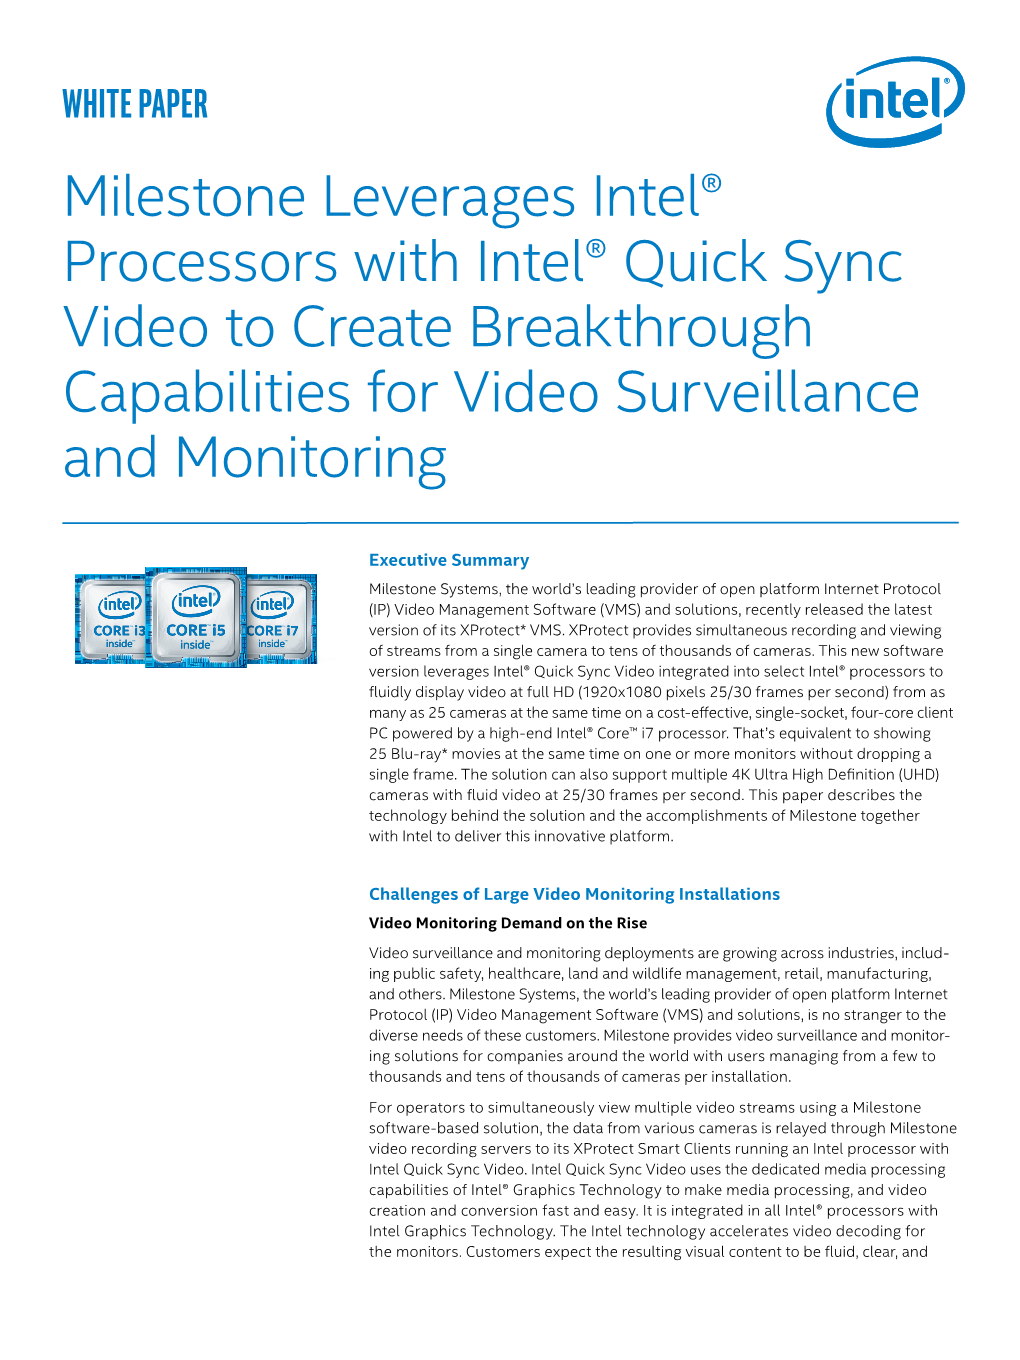 Milestone Leverages Intel® Processors with Intel® Quick Sync Video to Create Breakthrough Capabilities for Video Surveillance and Monitoring